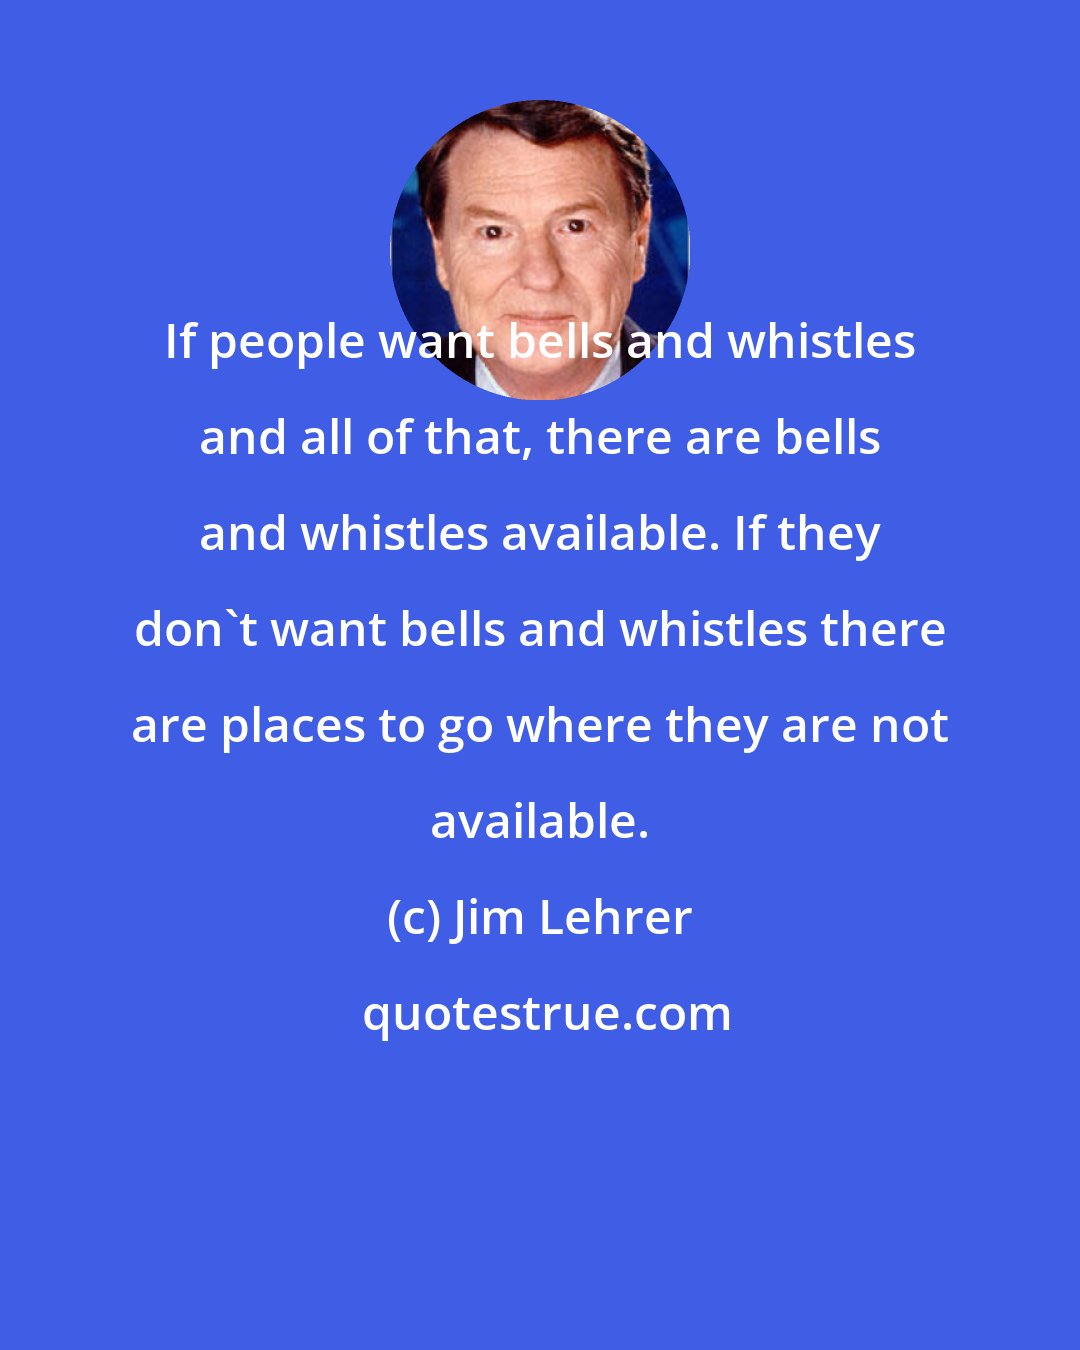 Jim Lehrer: If people want bells and whistles and all of that, there are bells and whistles available. If they don't want bells and whistles there are places to go where they are not available.